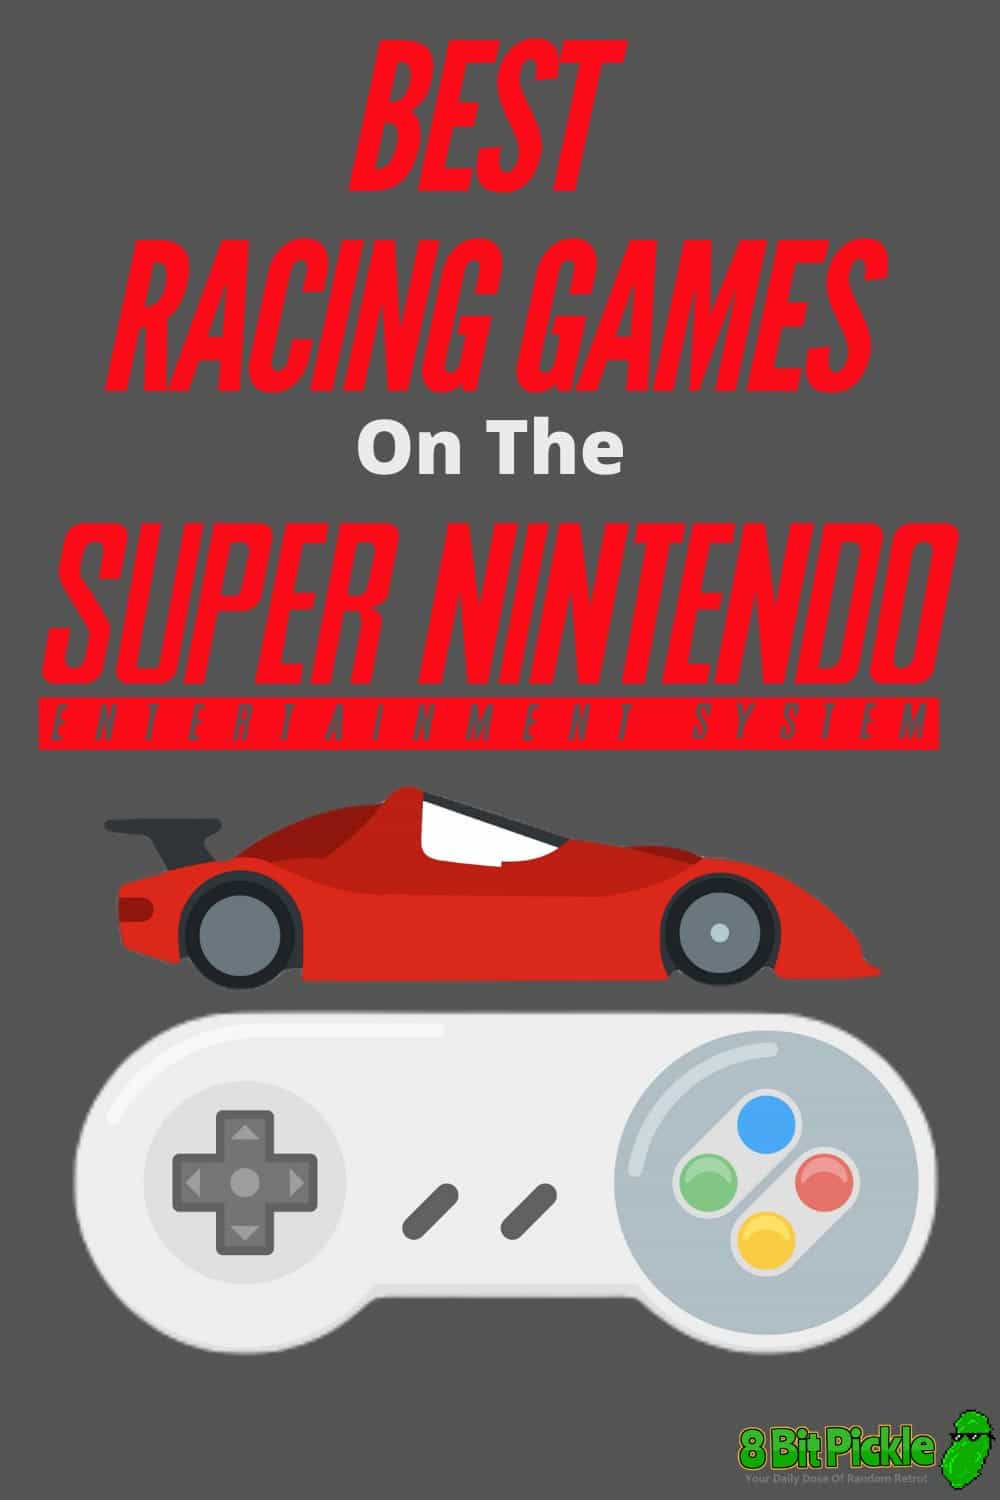 What Is The Best Racing Game On The Super Nintendo?